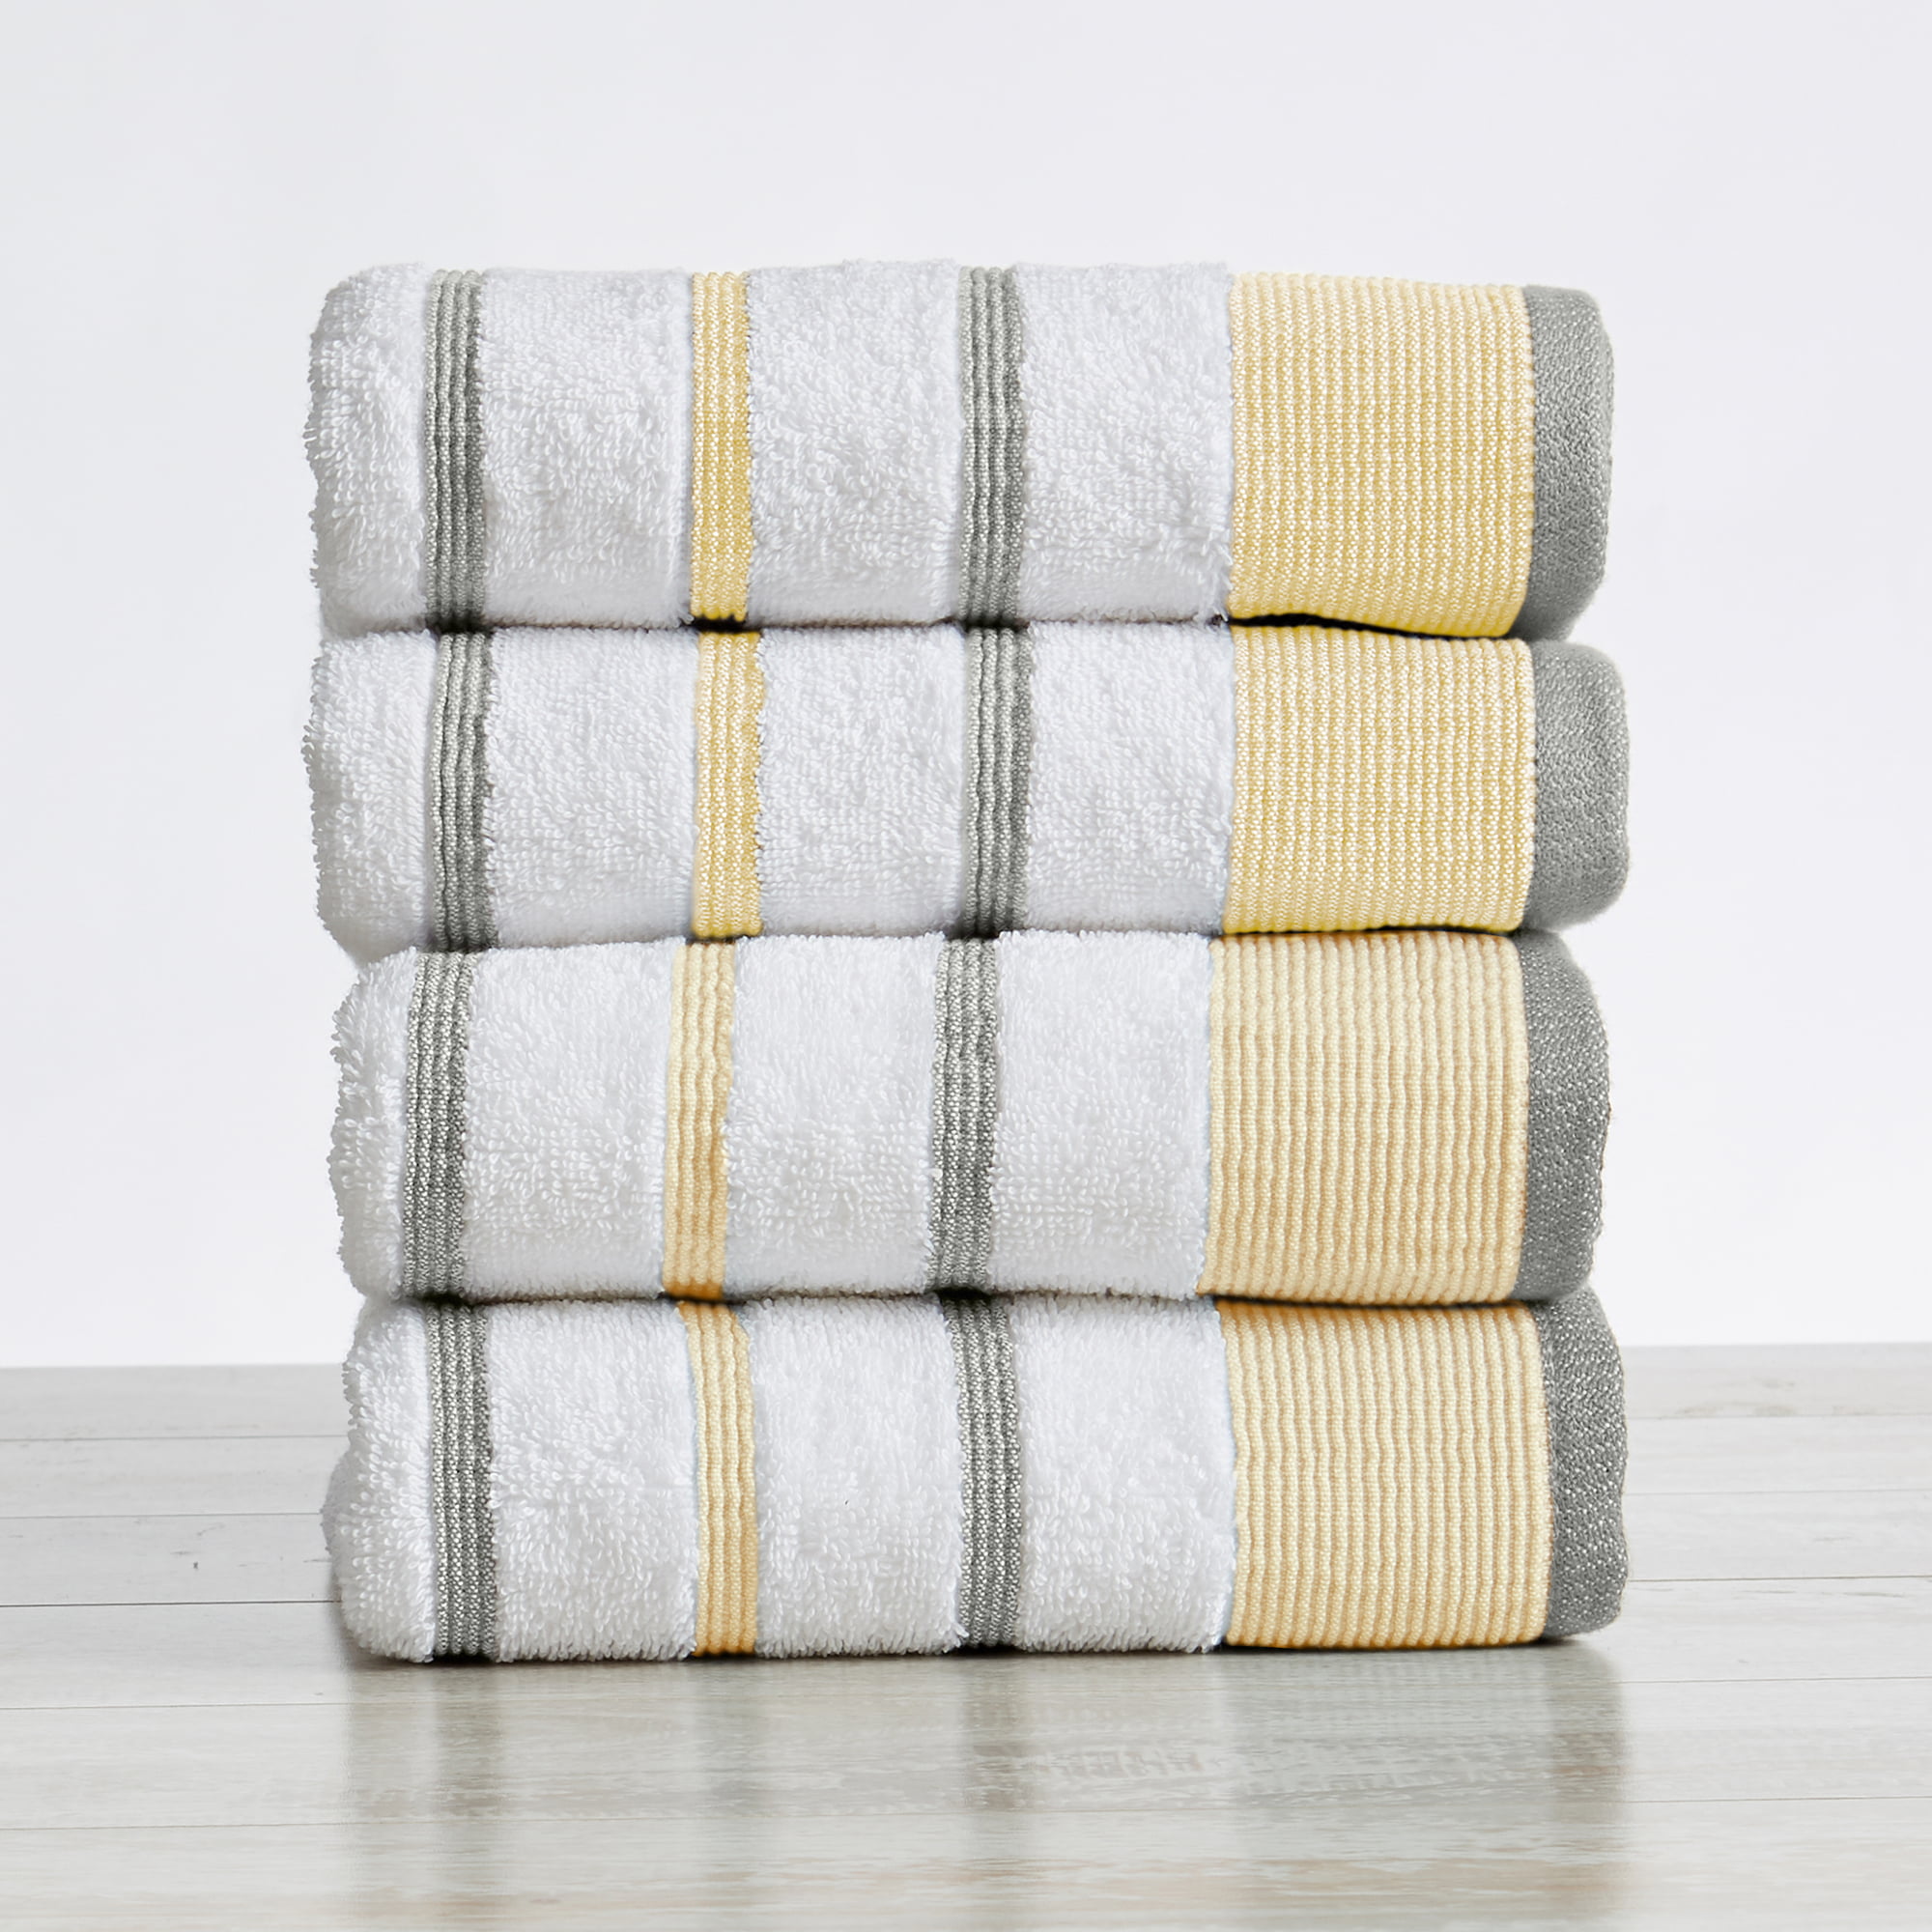 Assorted Stripped Pattern- Colorful Turkish Bath Towels